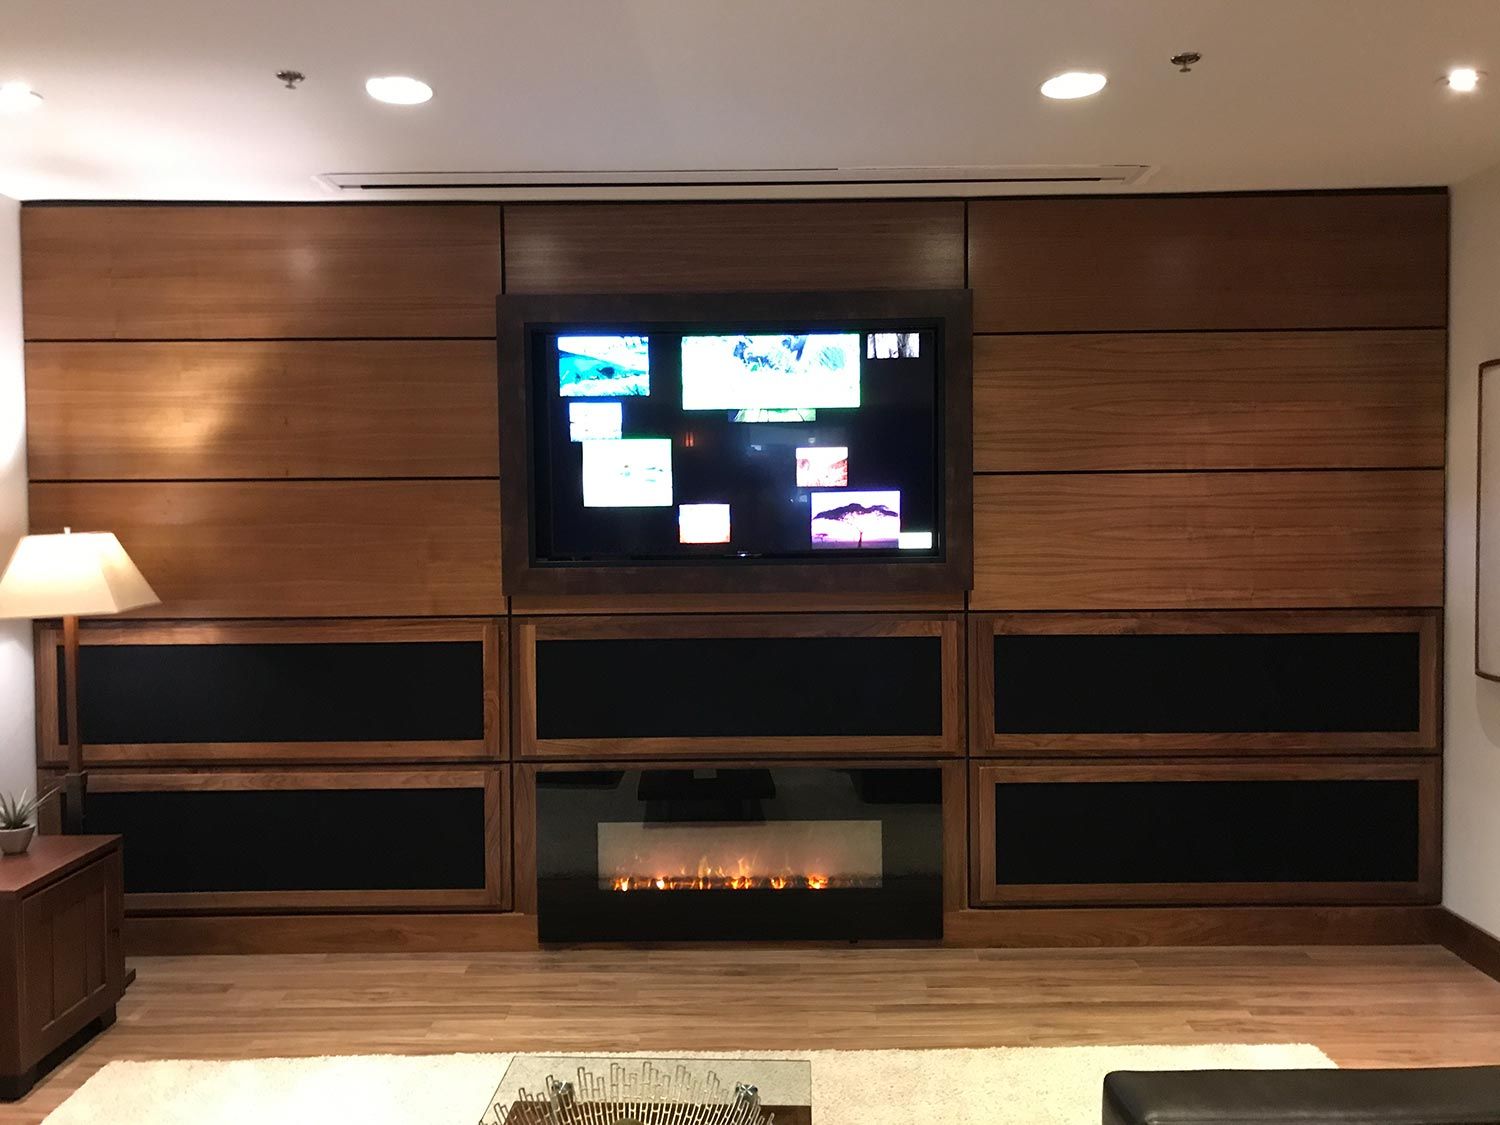 Media Room with dark wood furniture and fireplace